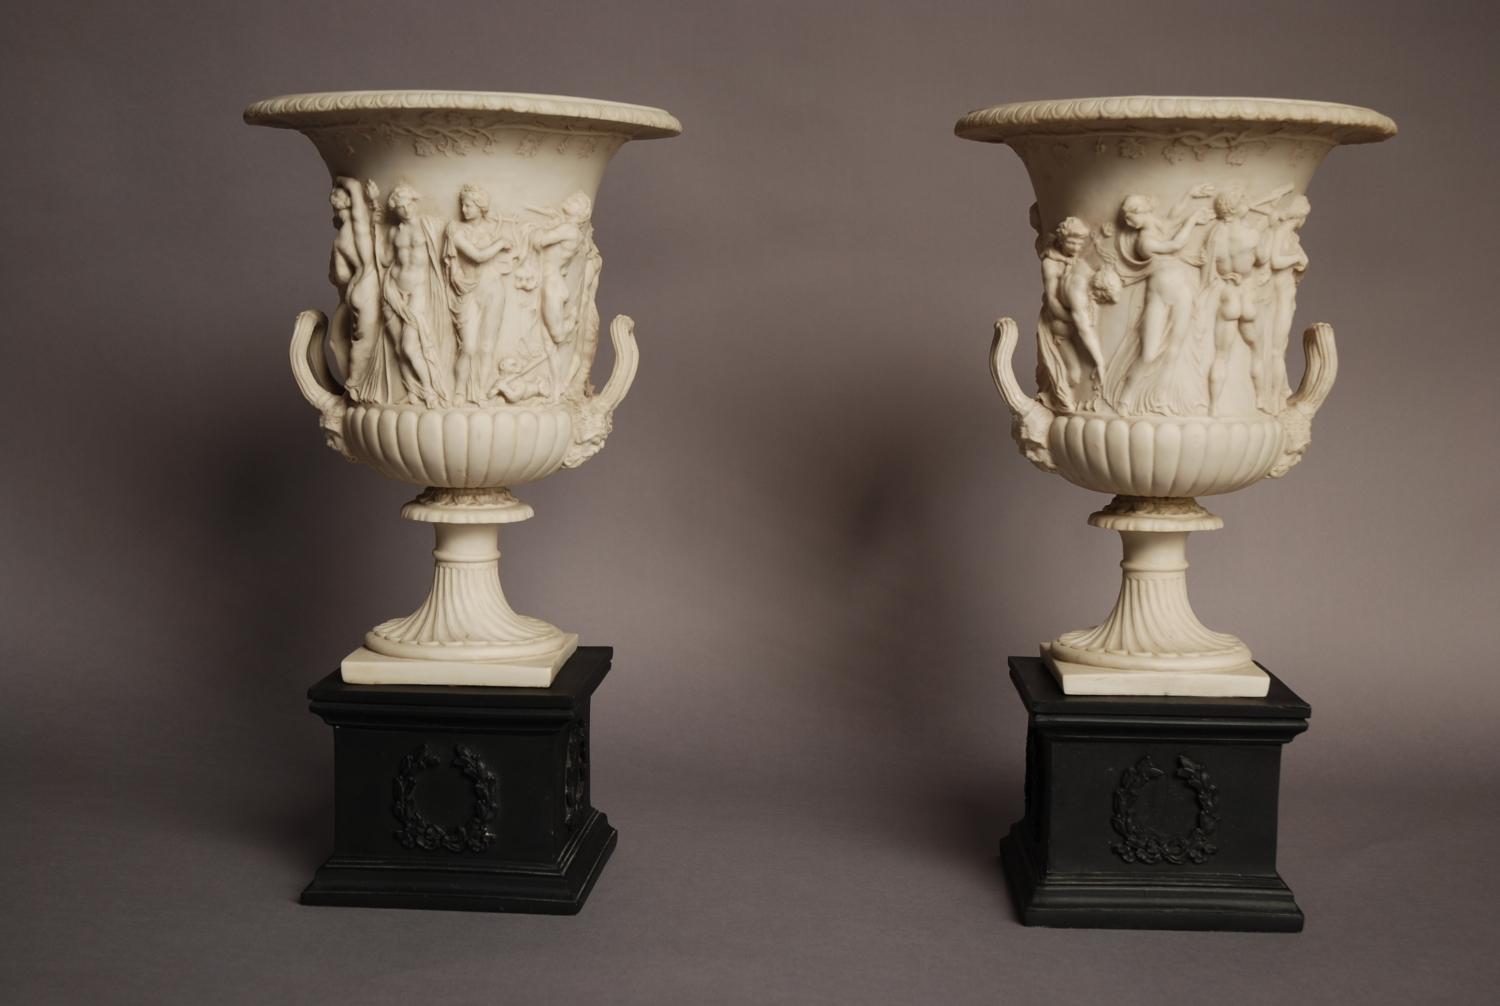 Pair of highly decorative classical urns